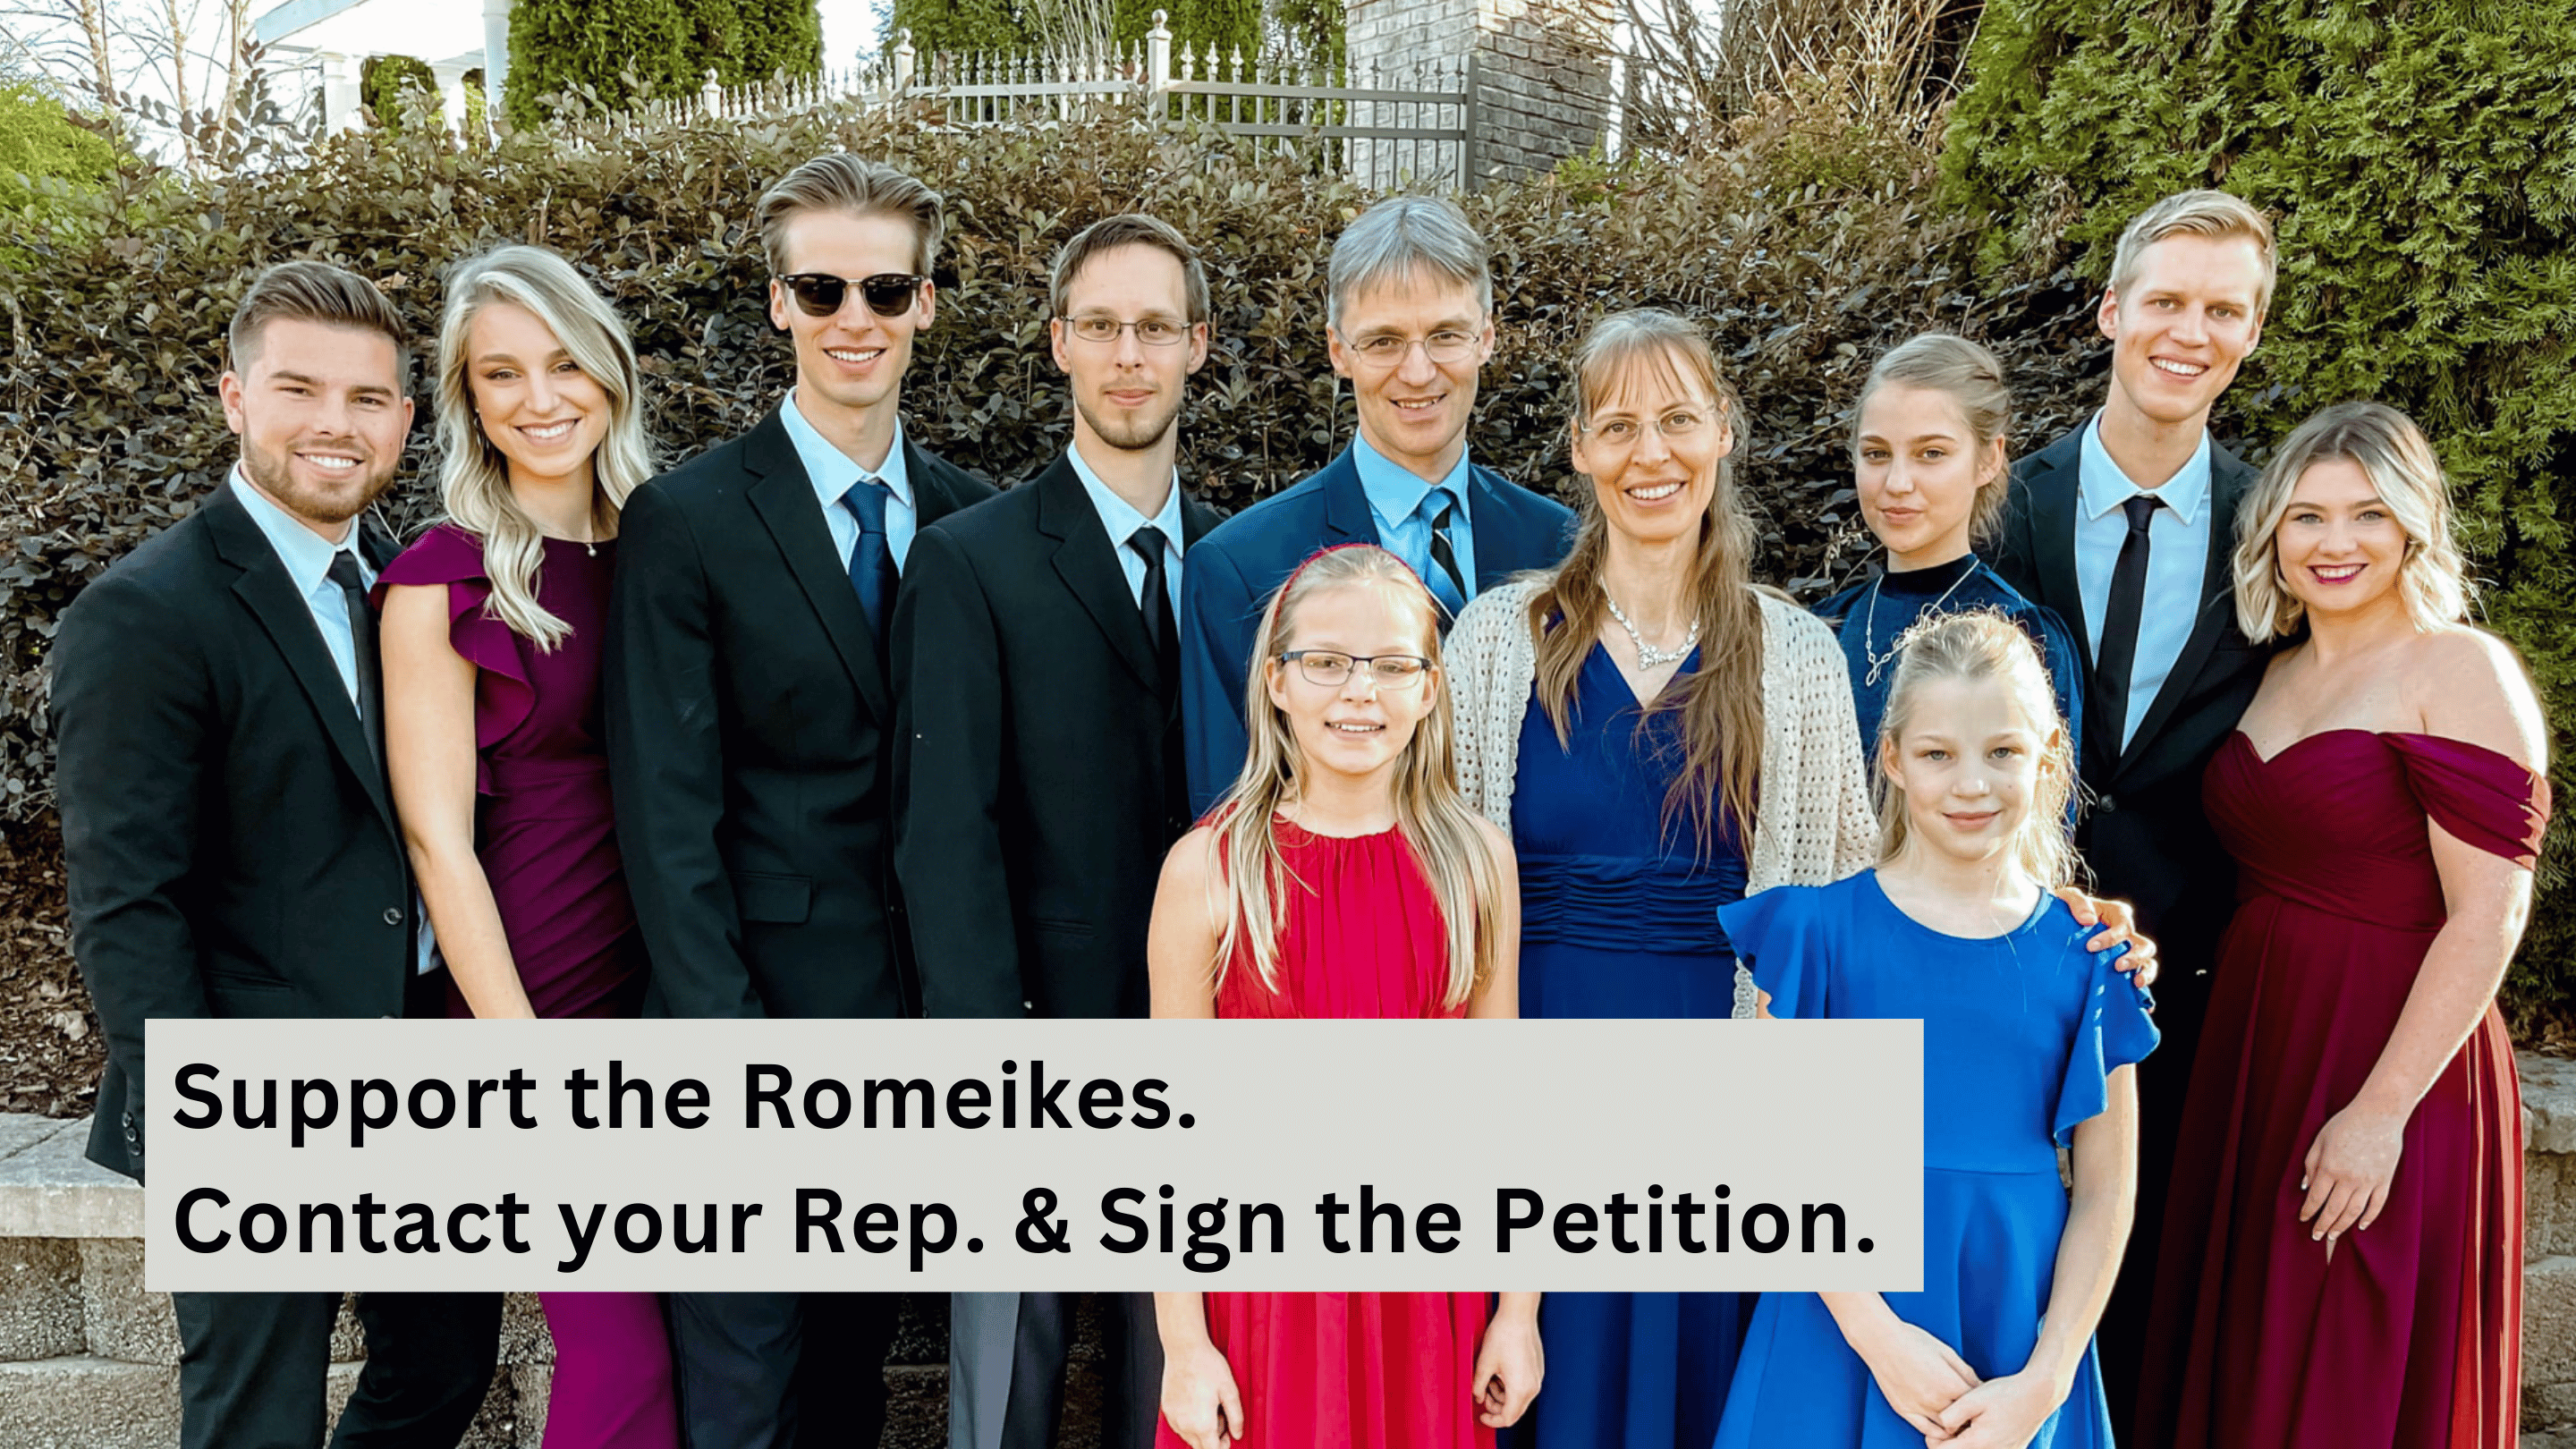 The Romeikes family, smiling at the camera, with text that says "Support the Remeikes. Contact your representative and sign the petition"